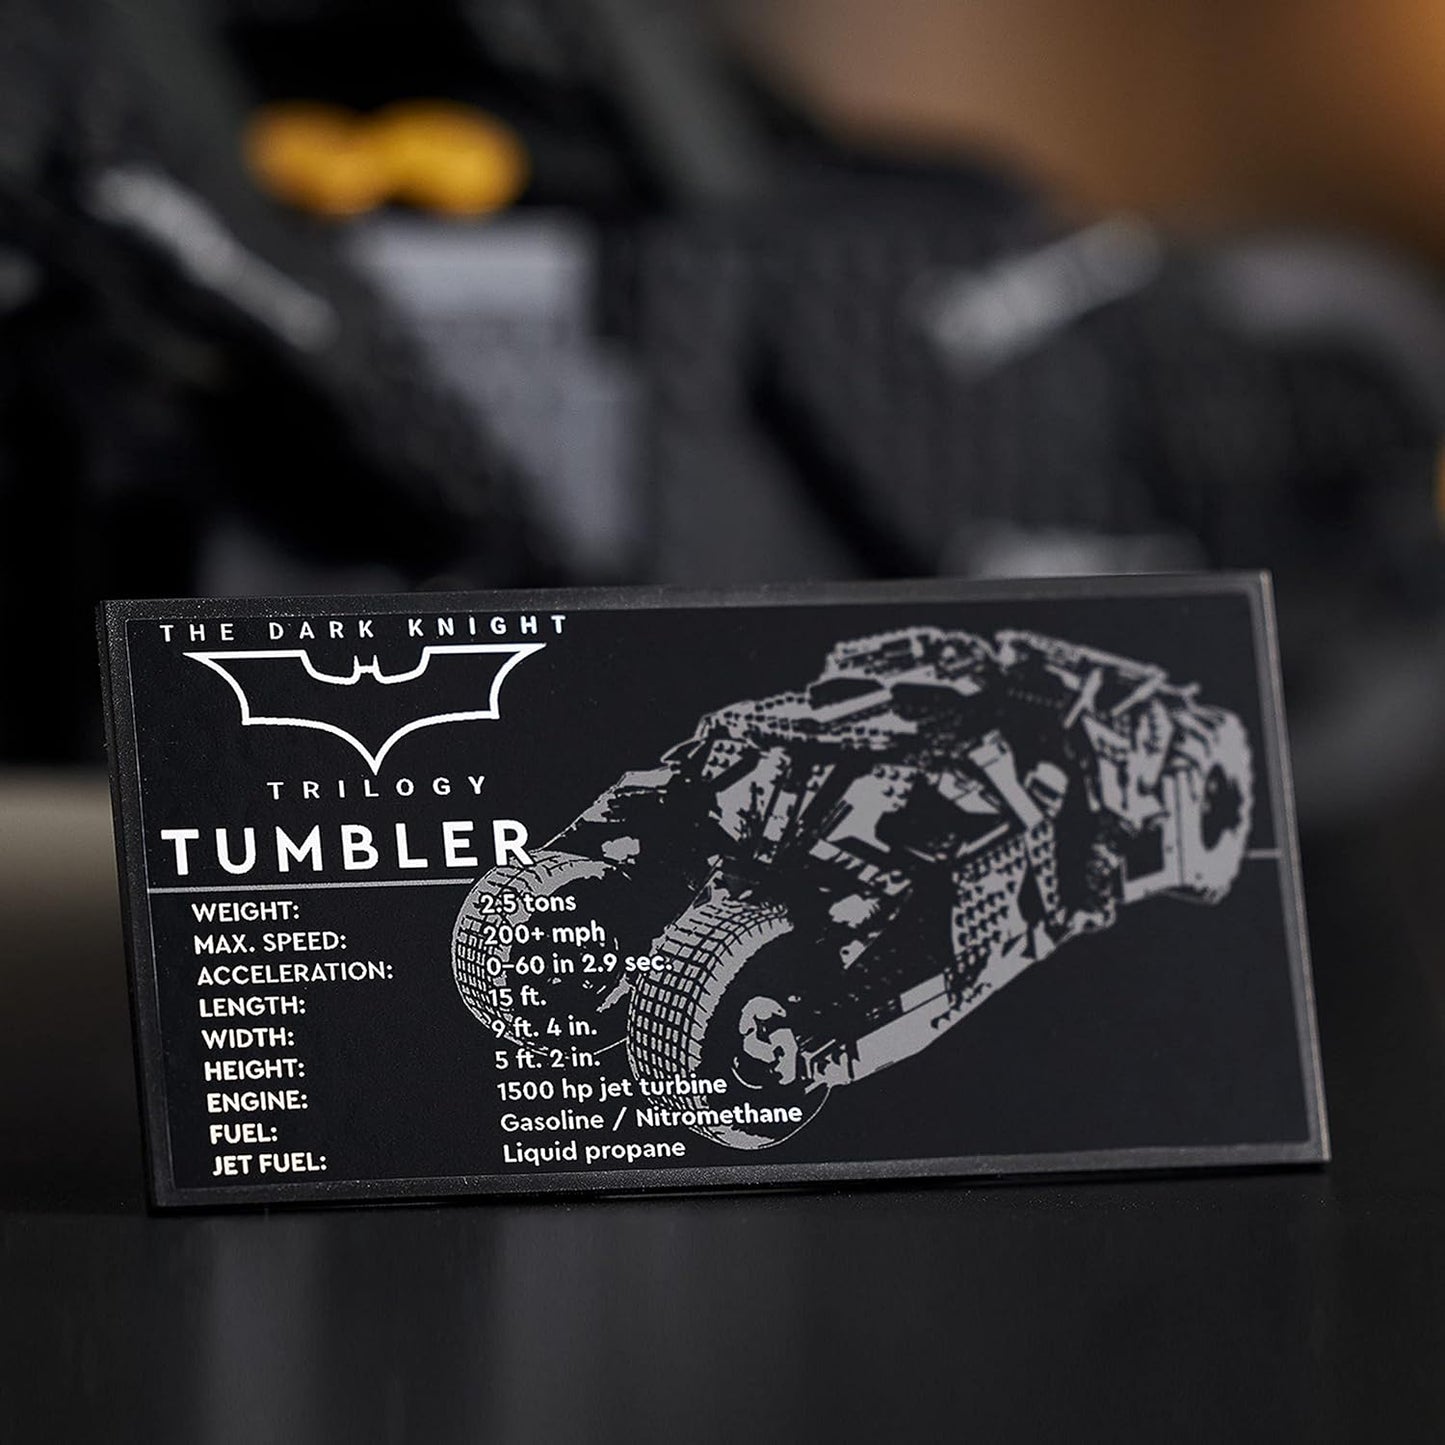 (Standard packaging, Single) - LEGO 76240 DC Batman Batmobile Tumbler Iconic Car Model from The Dark Knight Trilogy, Building Set for Adults, Collectible Display Gift Idea